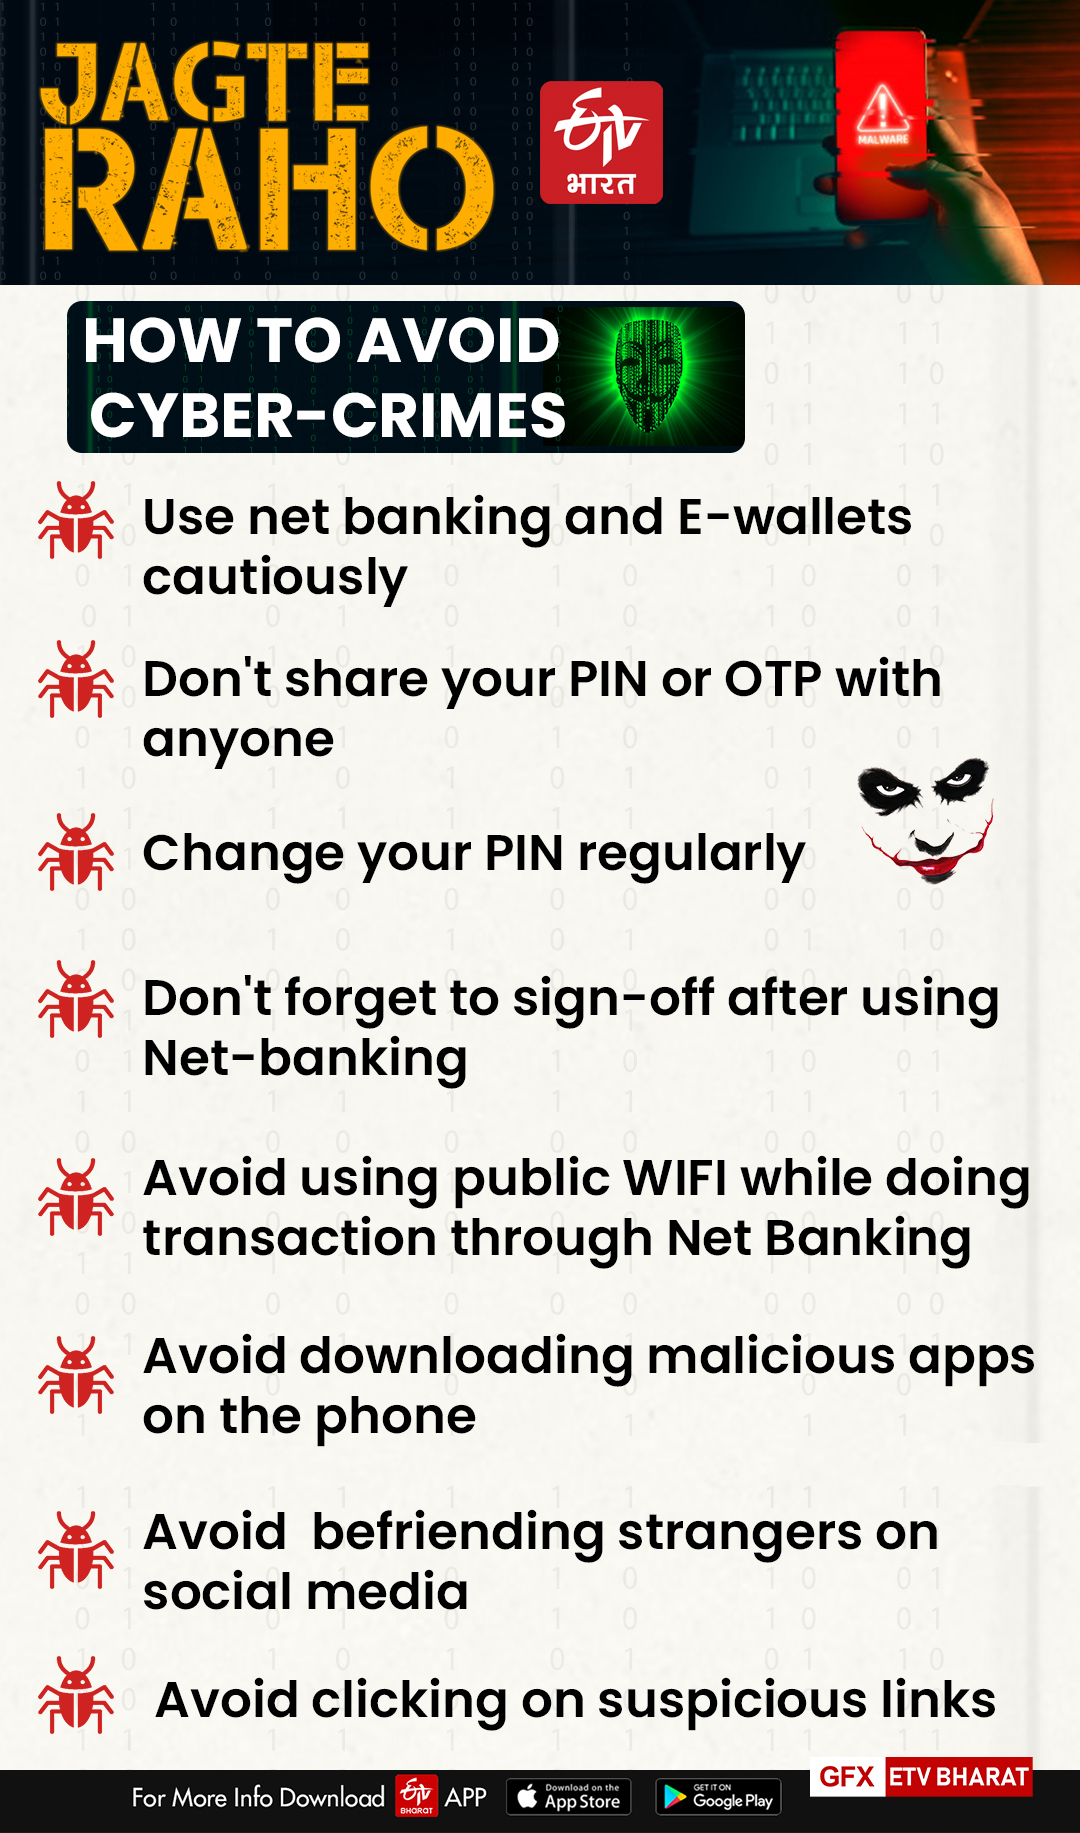 How to avoid cyber-crimes